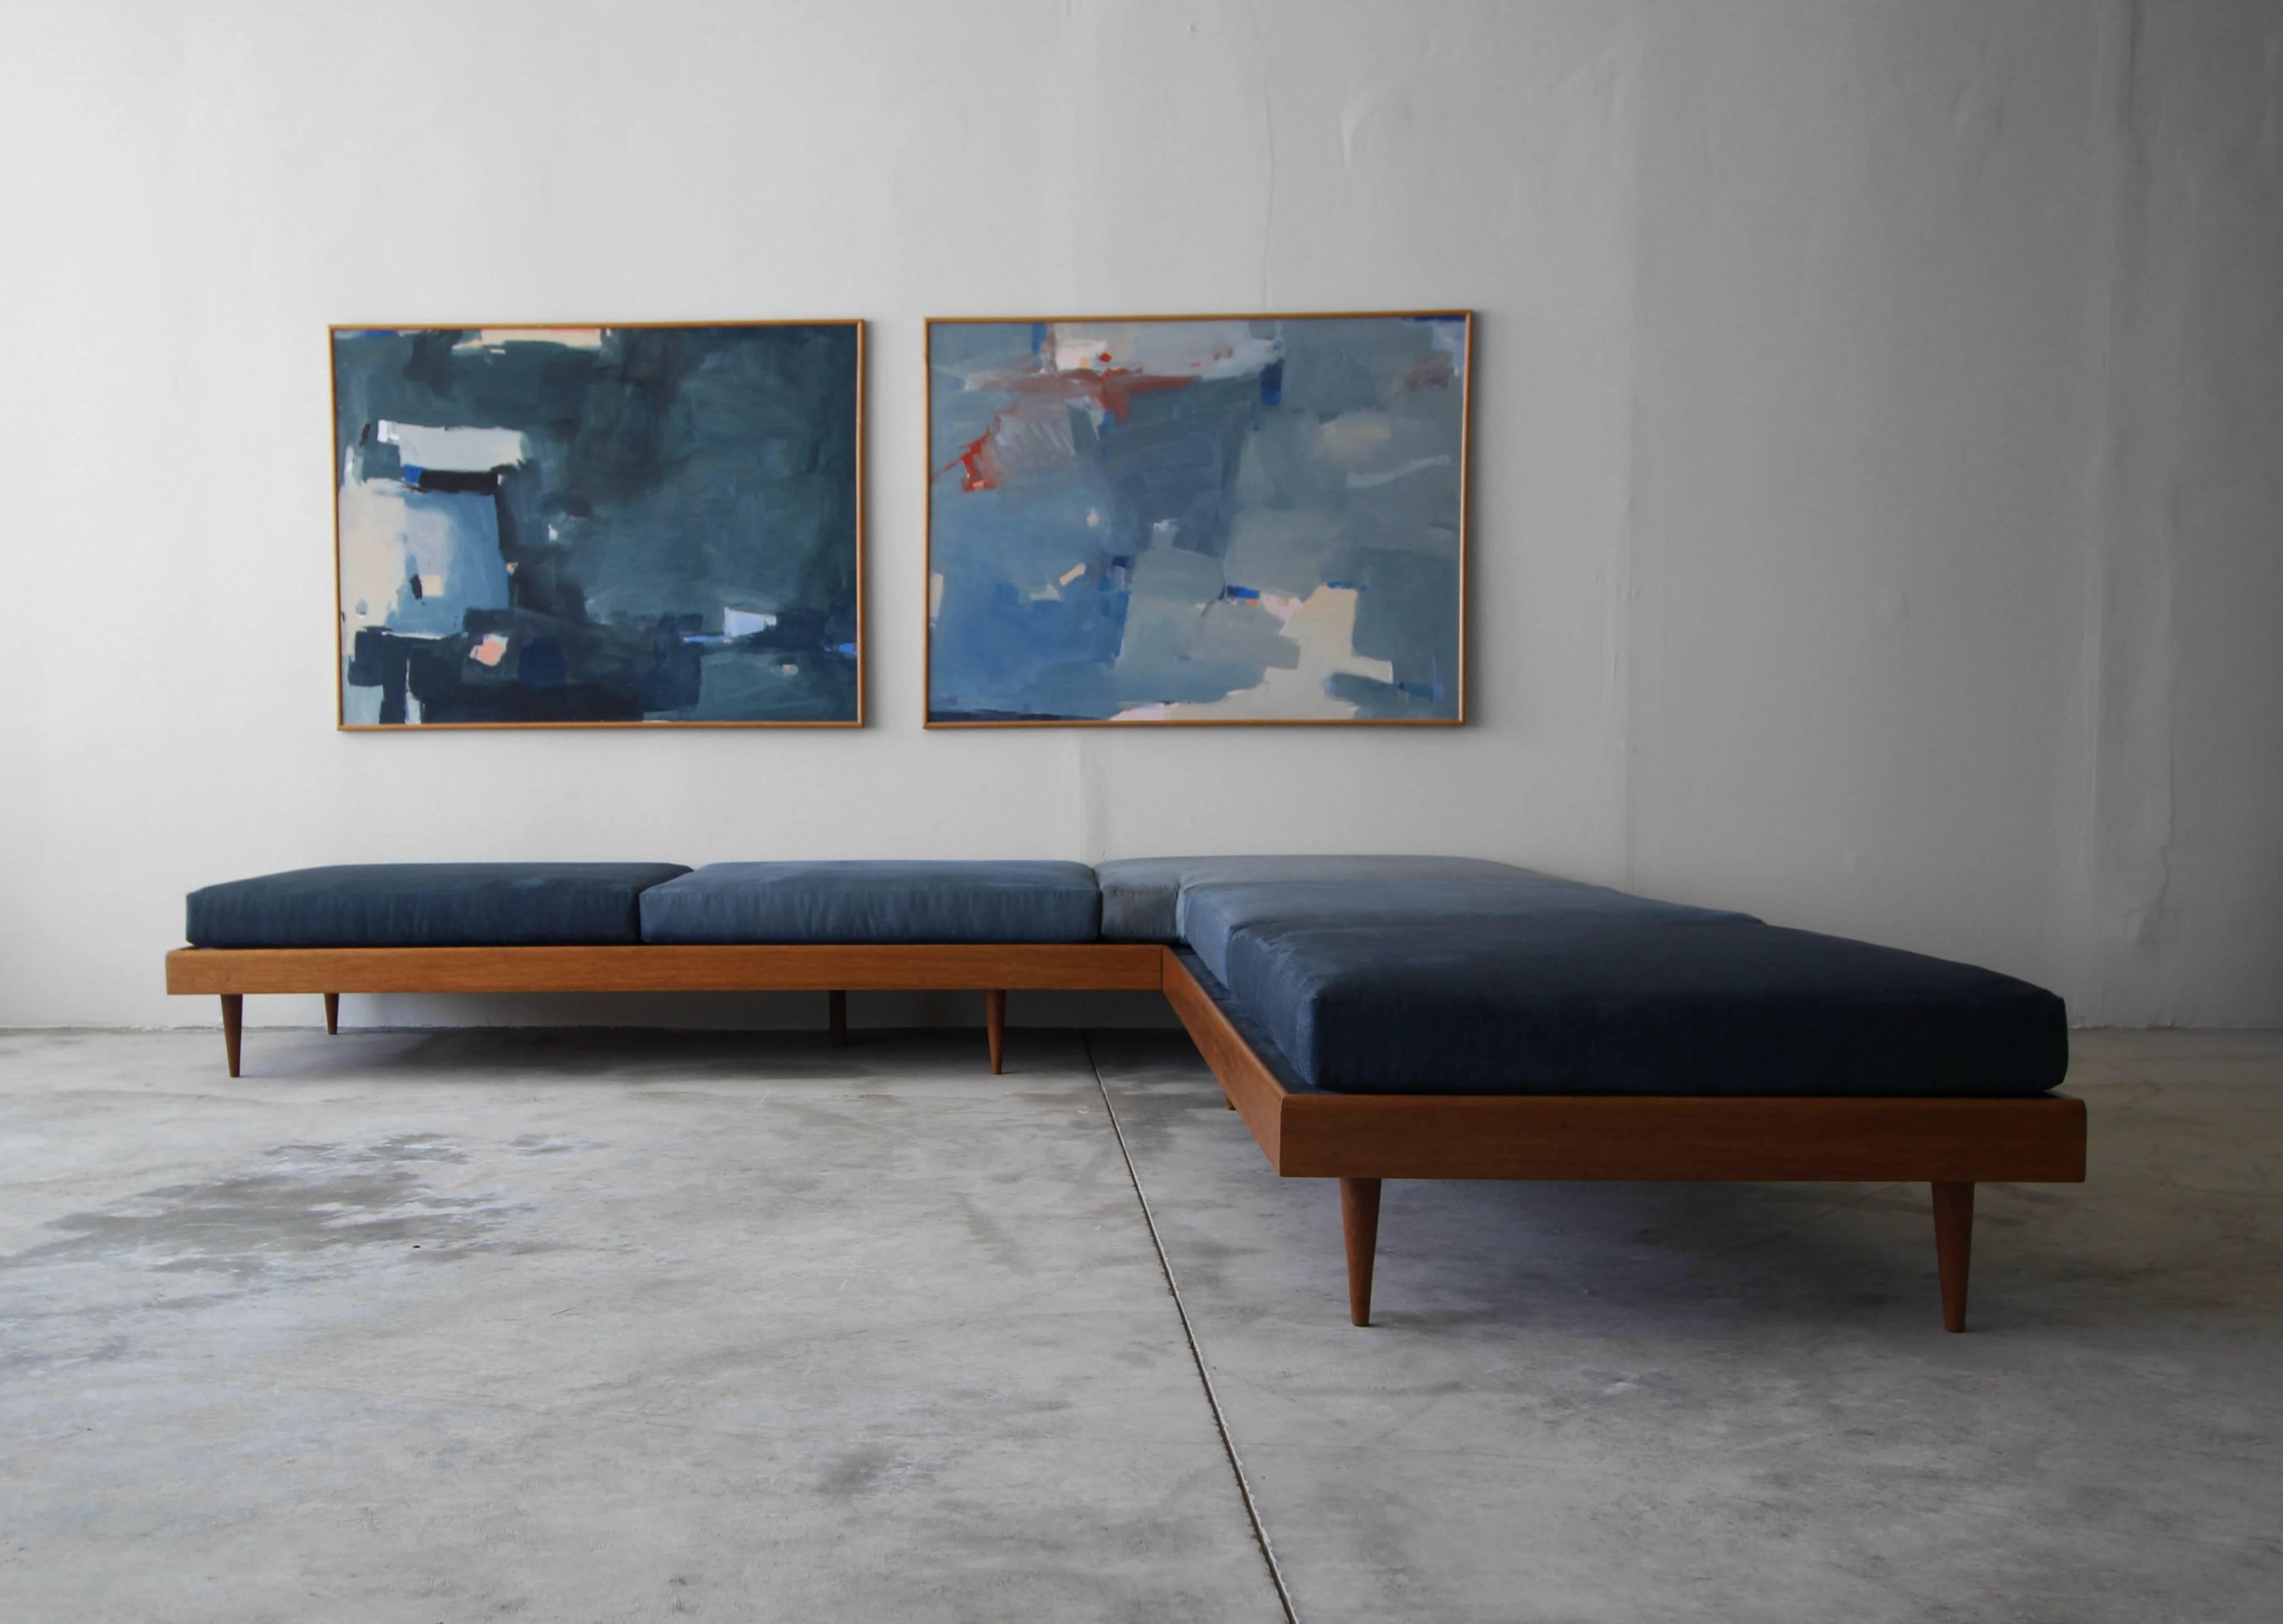 This lovely blue set, will have you feeling anything but blue. The L-shaped bench sofa  is absolutely stunning. They would look perfect in most any setting. The sofa benches are constructed out two teak frames that securely attach to each other at